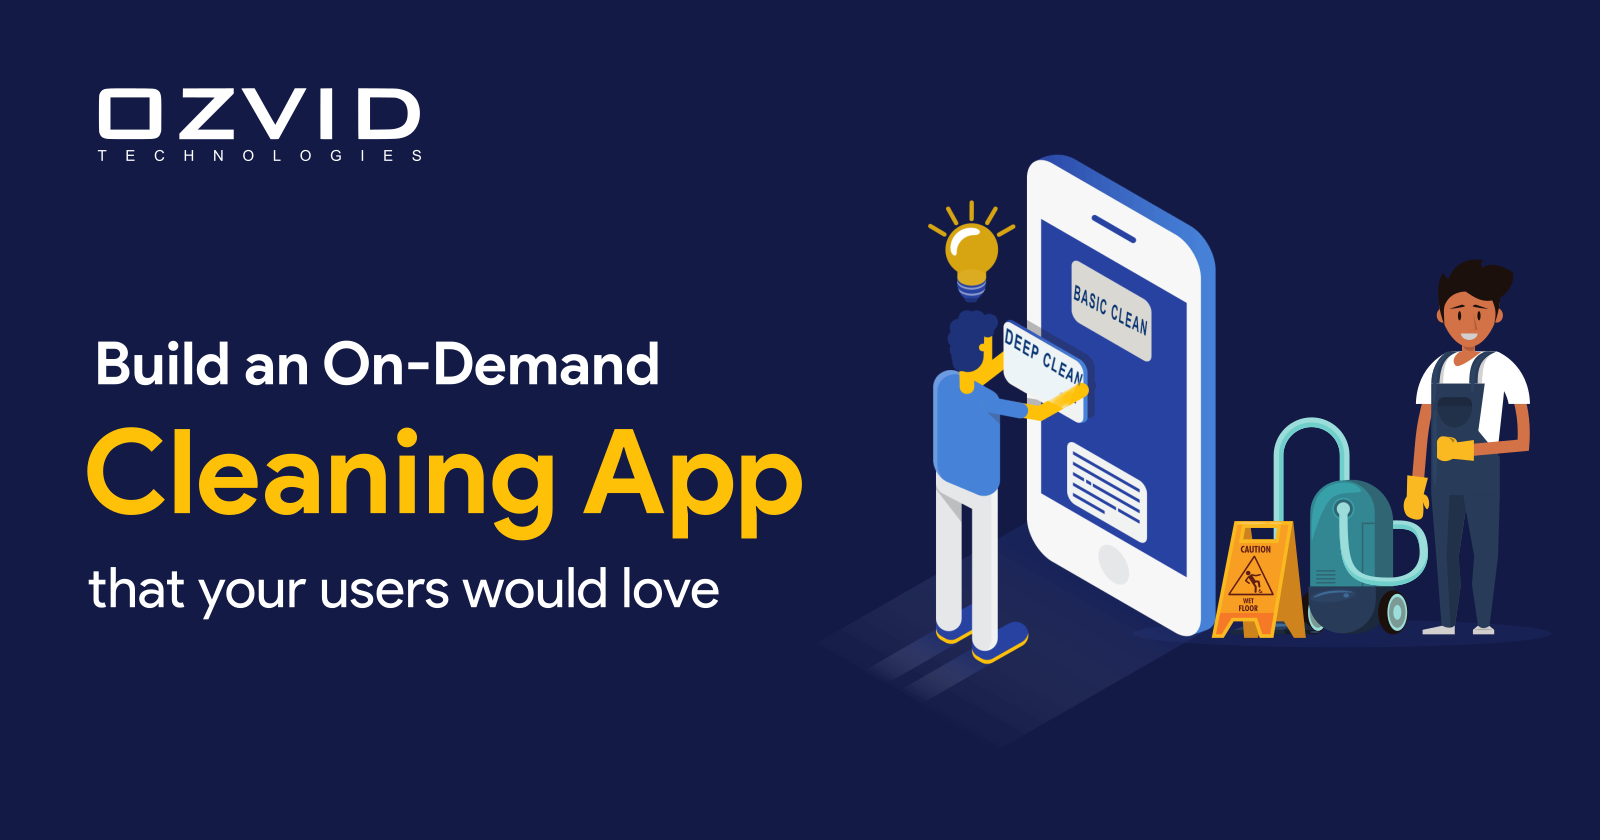 How to Build an On-demand Cleaning App that Your Users Would Love?